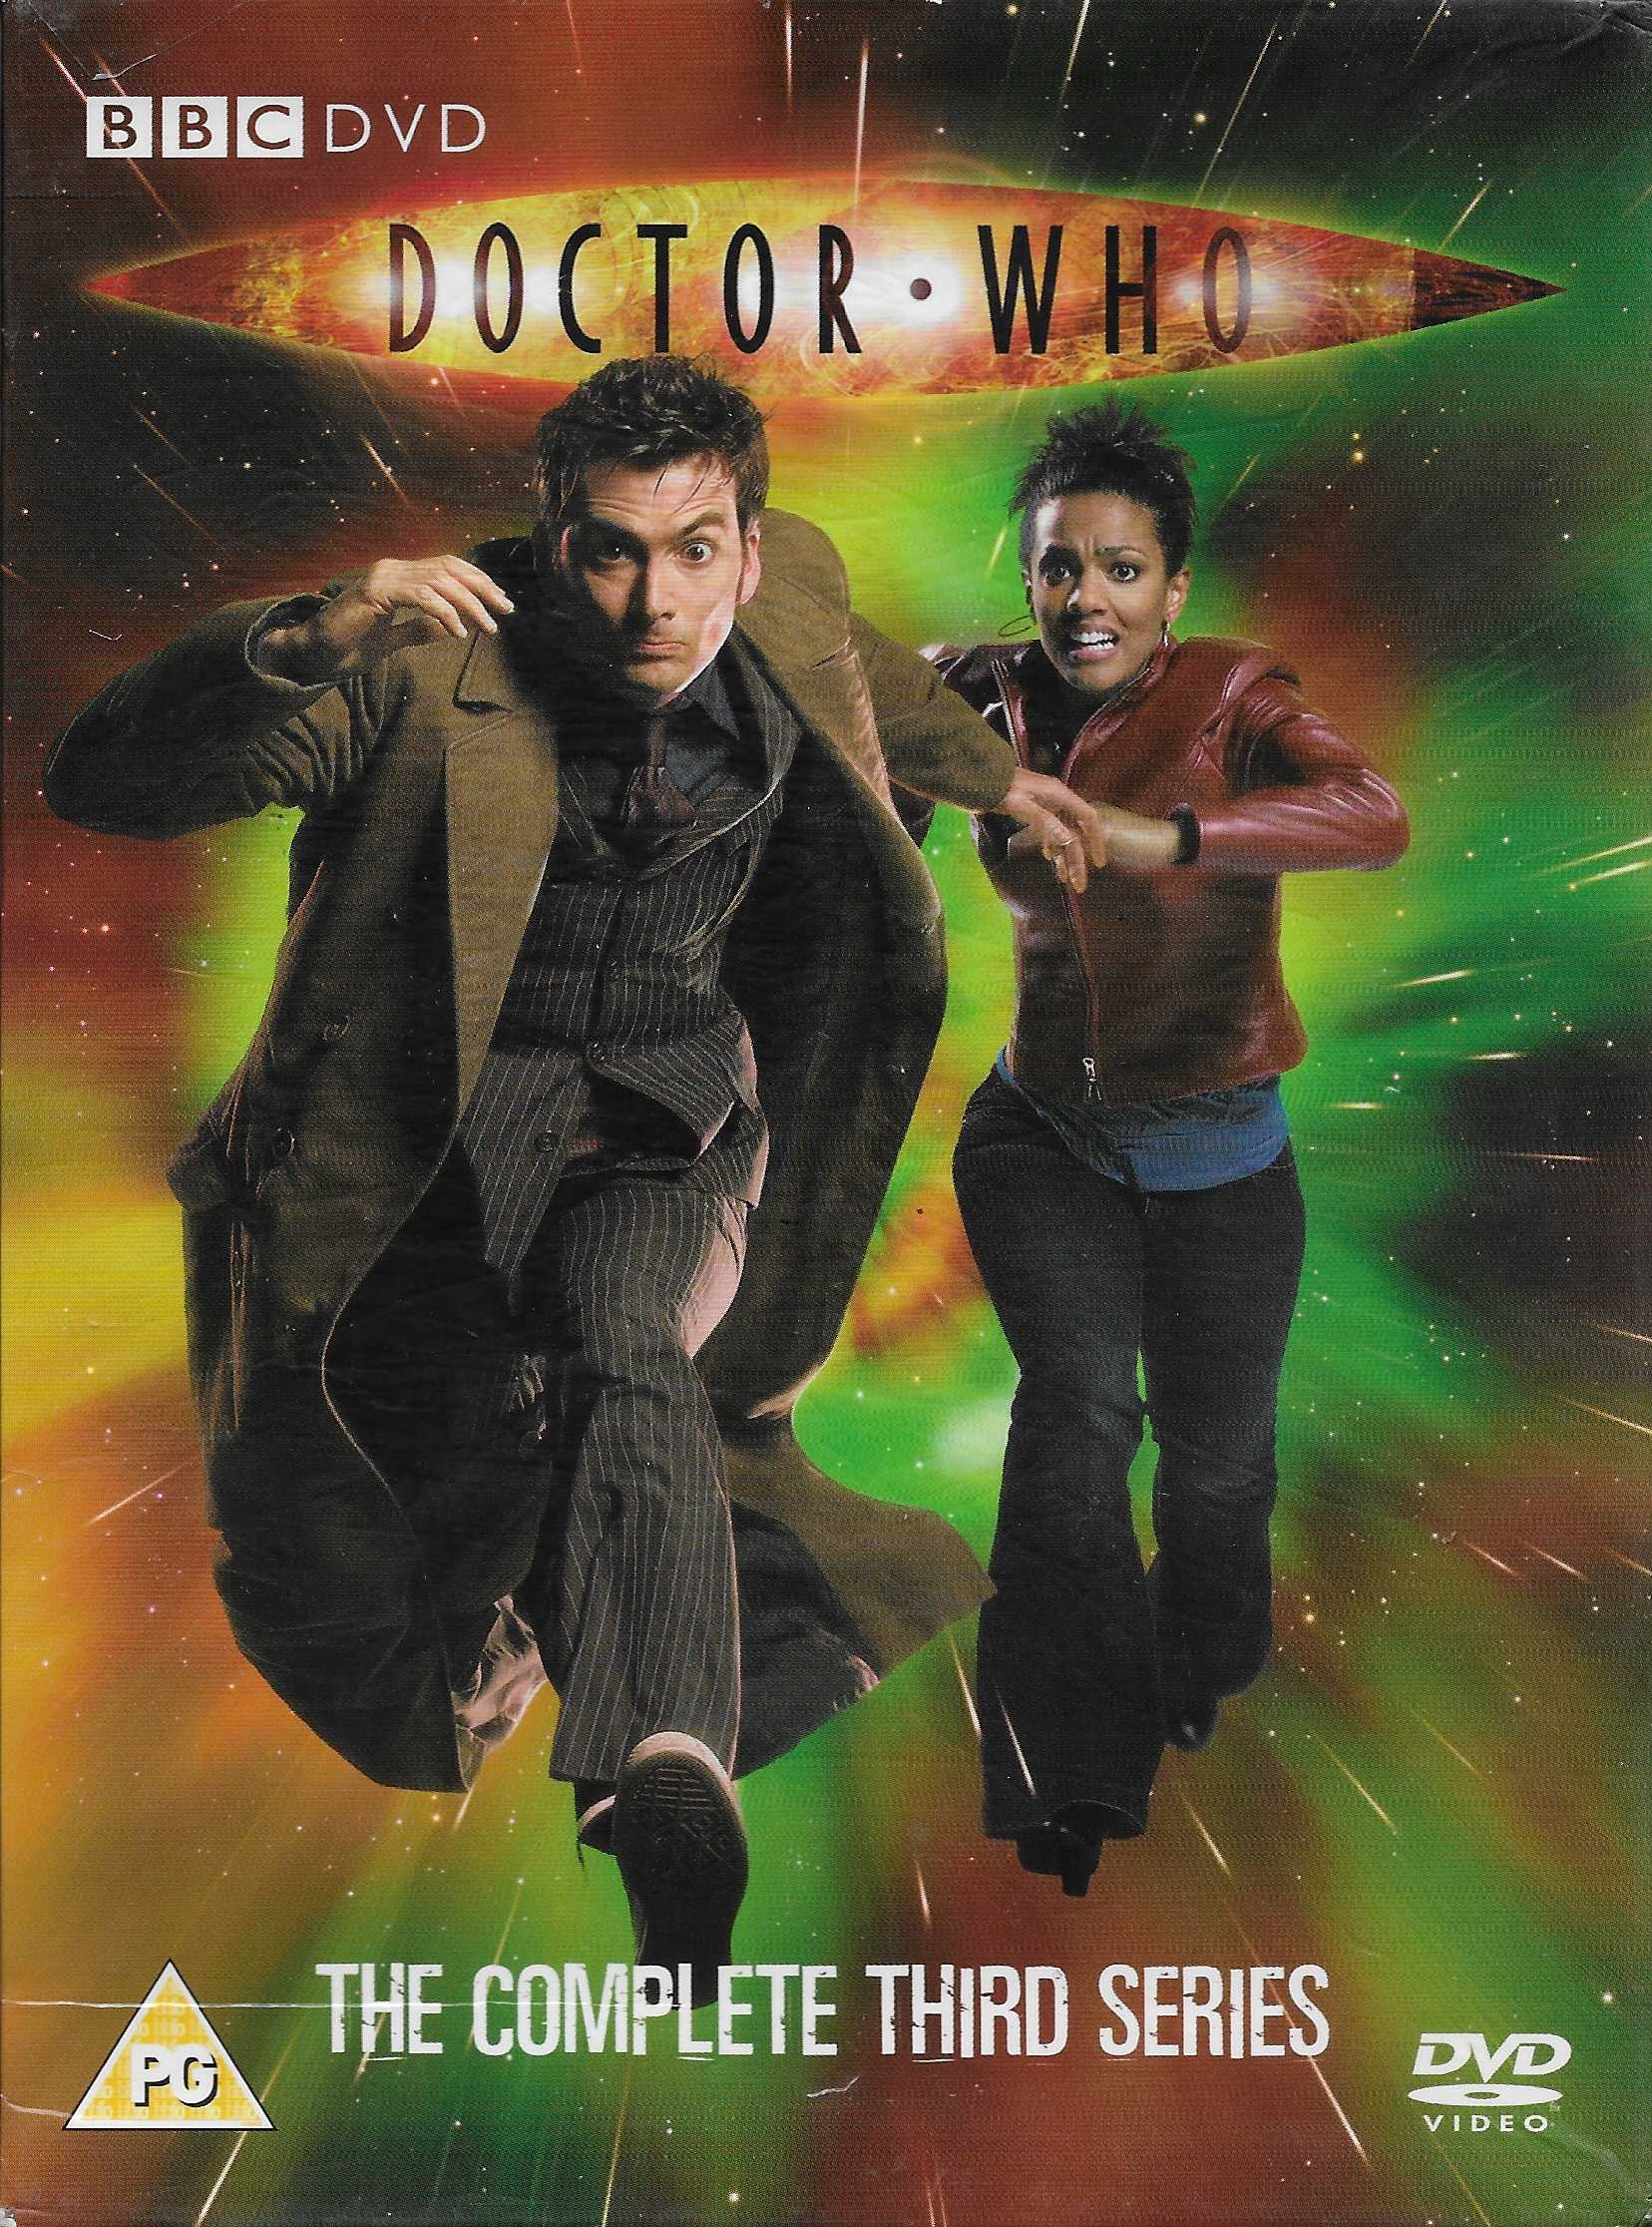 Picture of BBCDVD 2539 Doctor Who - Series 3 boxed set (Limted Amazon packaging) by artist Various from the BBC dvds - Records and Tapes library